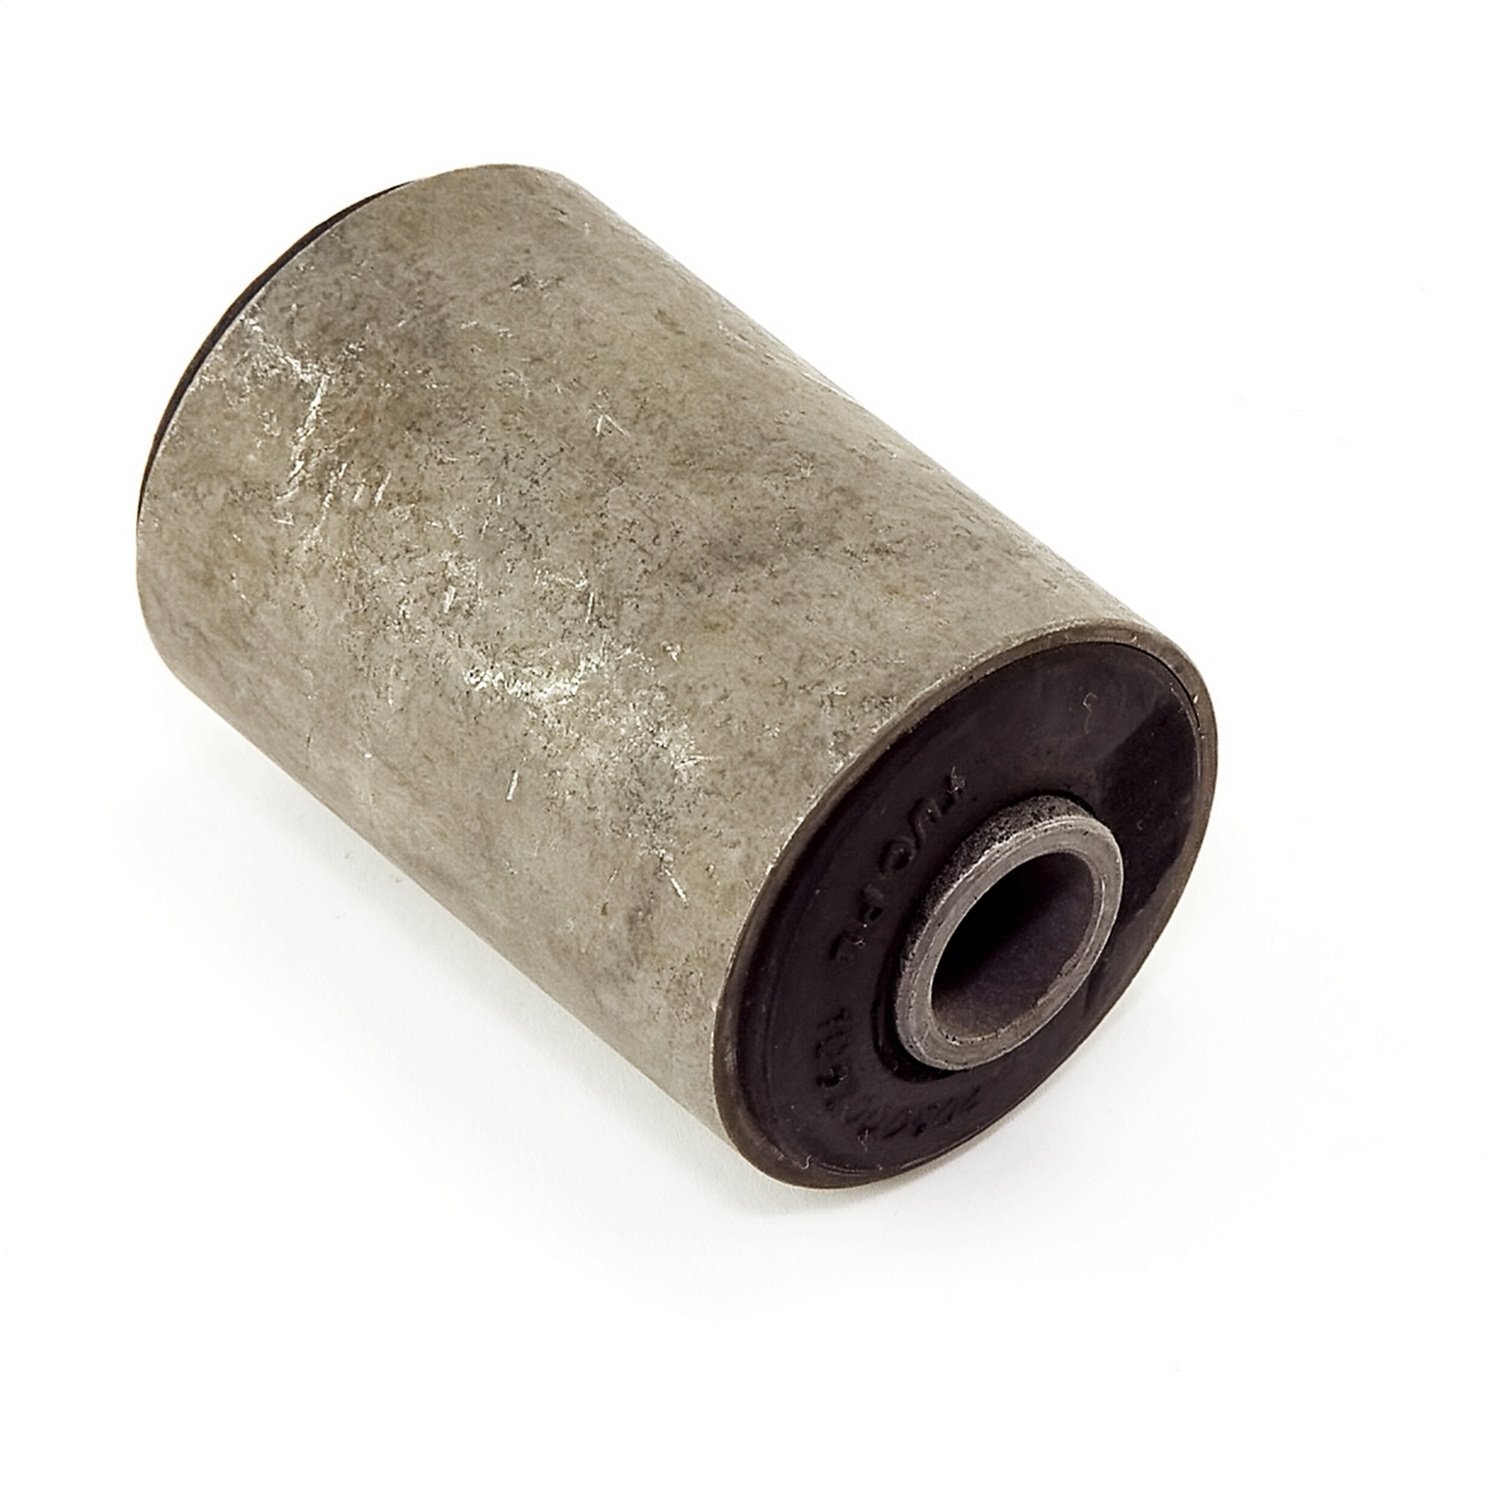 This factory-style rear leaf spring main eye bushing from Omix-ADA fits 84-01 Jeep Cherokee XJ .